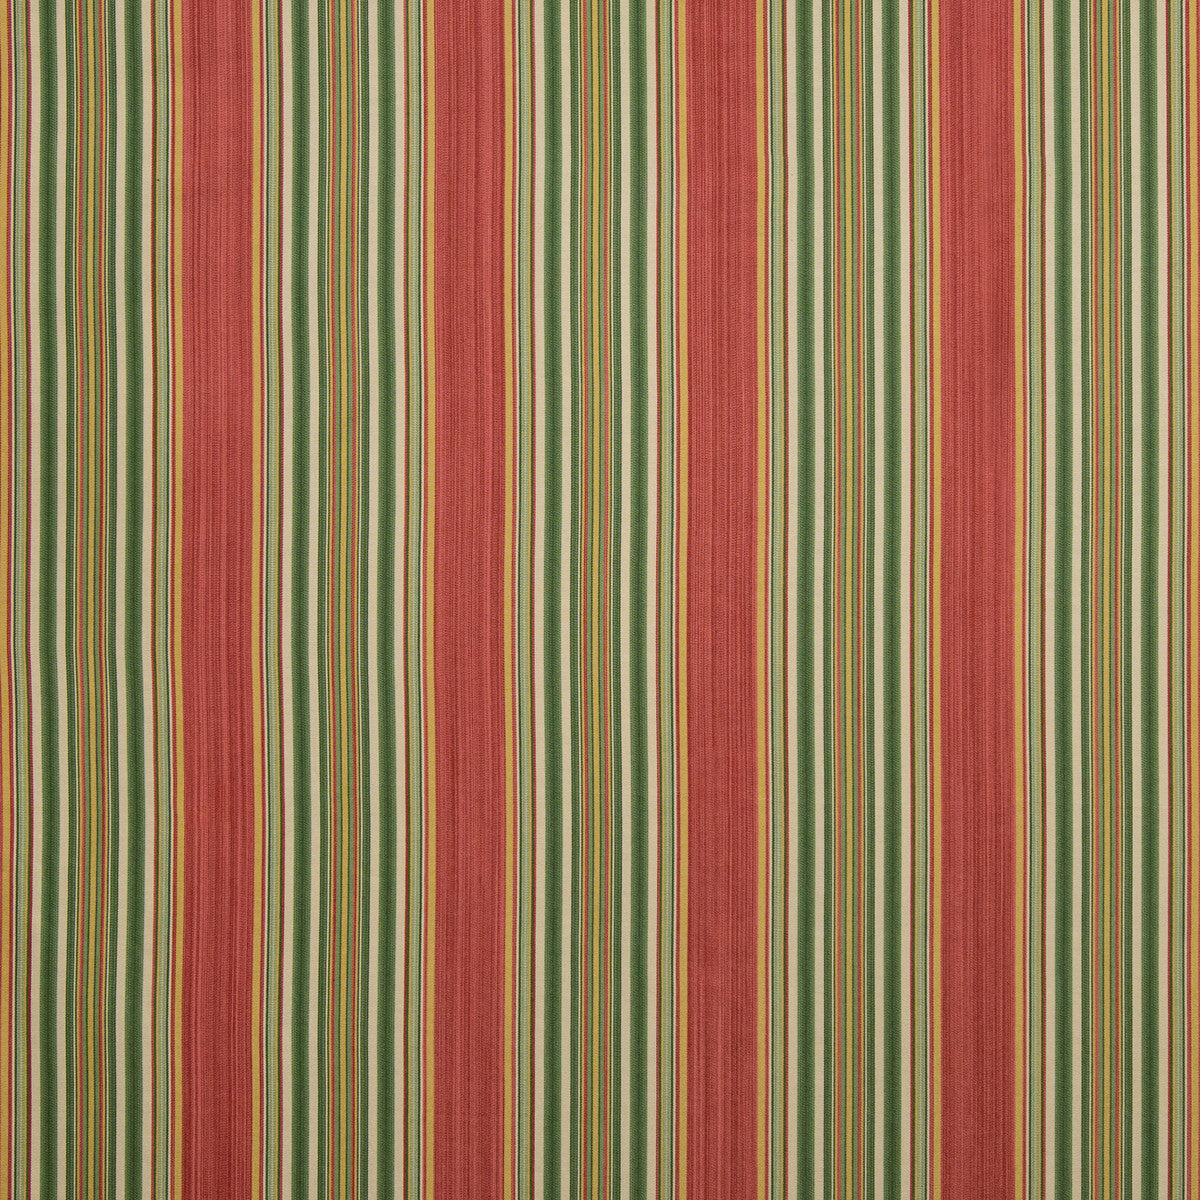 Vyne Stripe fabric in berry color - pattern 2019103.193.0 - by Lee Jofa in the Manor House collection